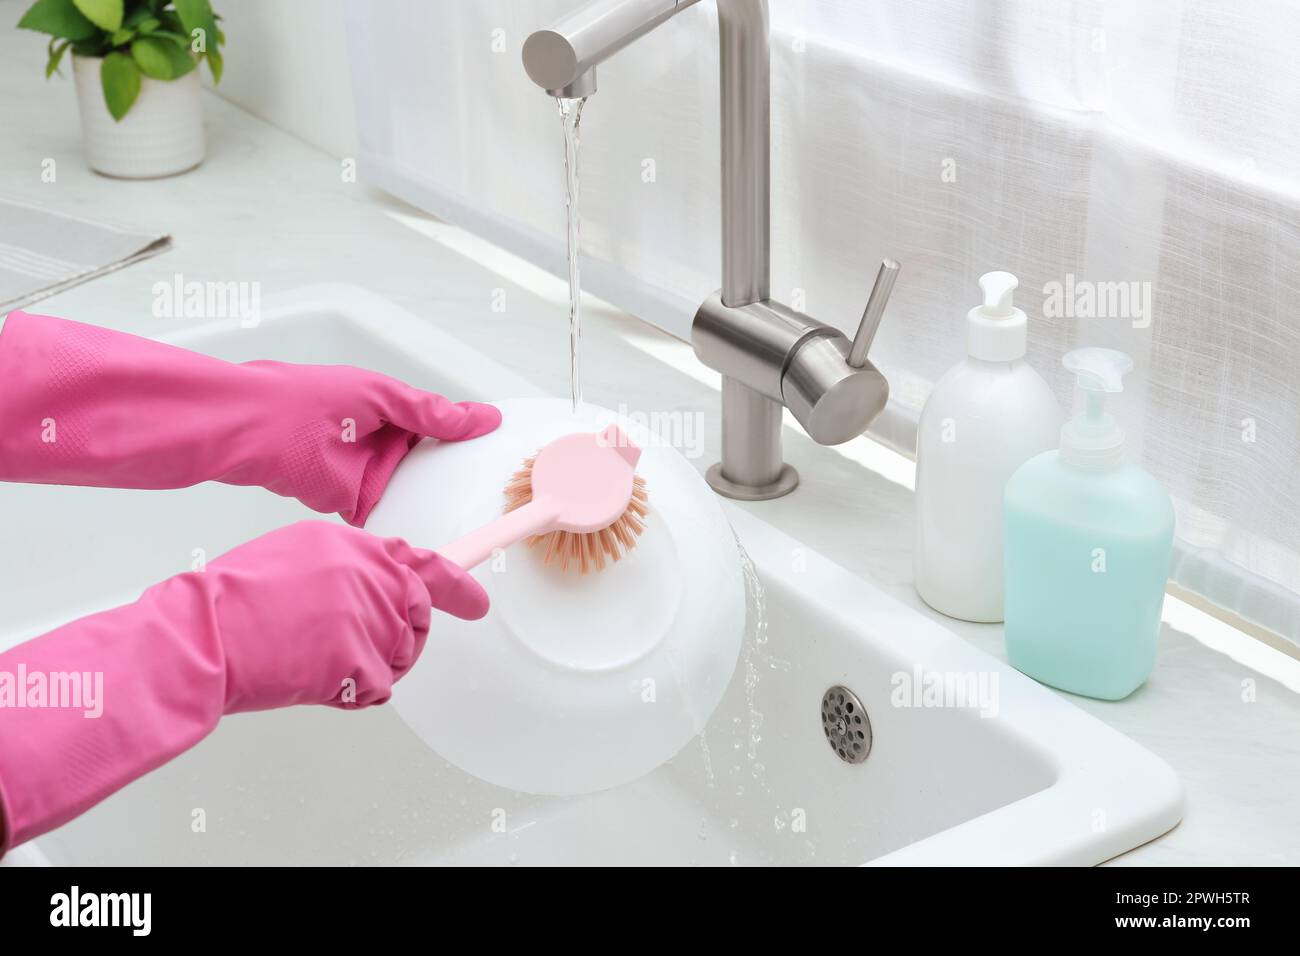 https://c8.alamy.com/comp/2PWH5TR/woman-washing-bowl-with-brush-above-sink-in-kitchen-closeup-2PWH5TR.jpg